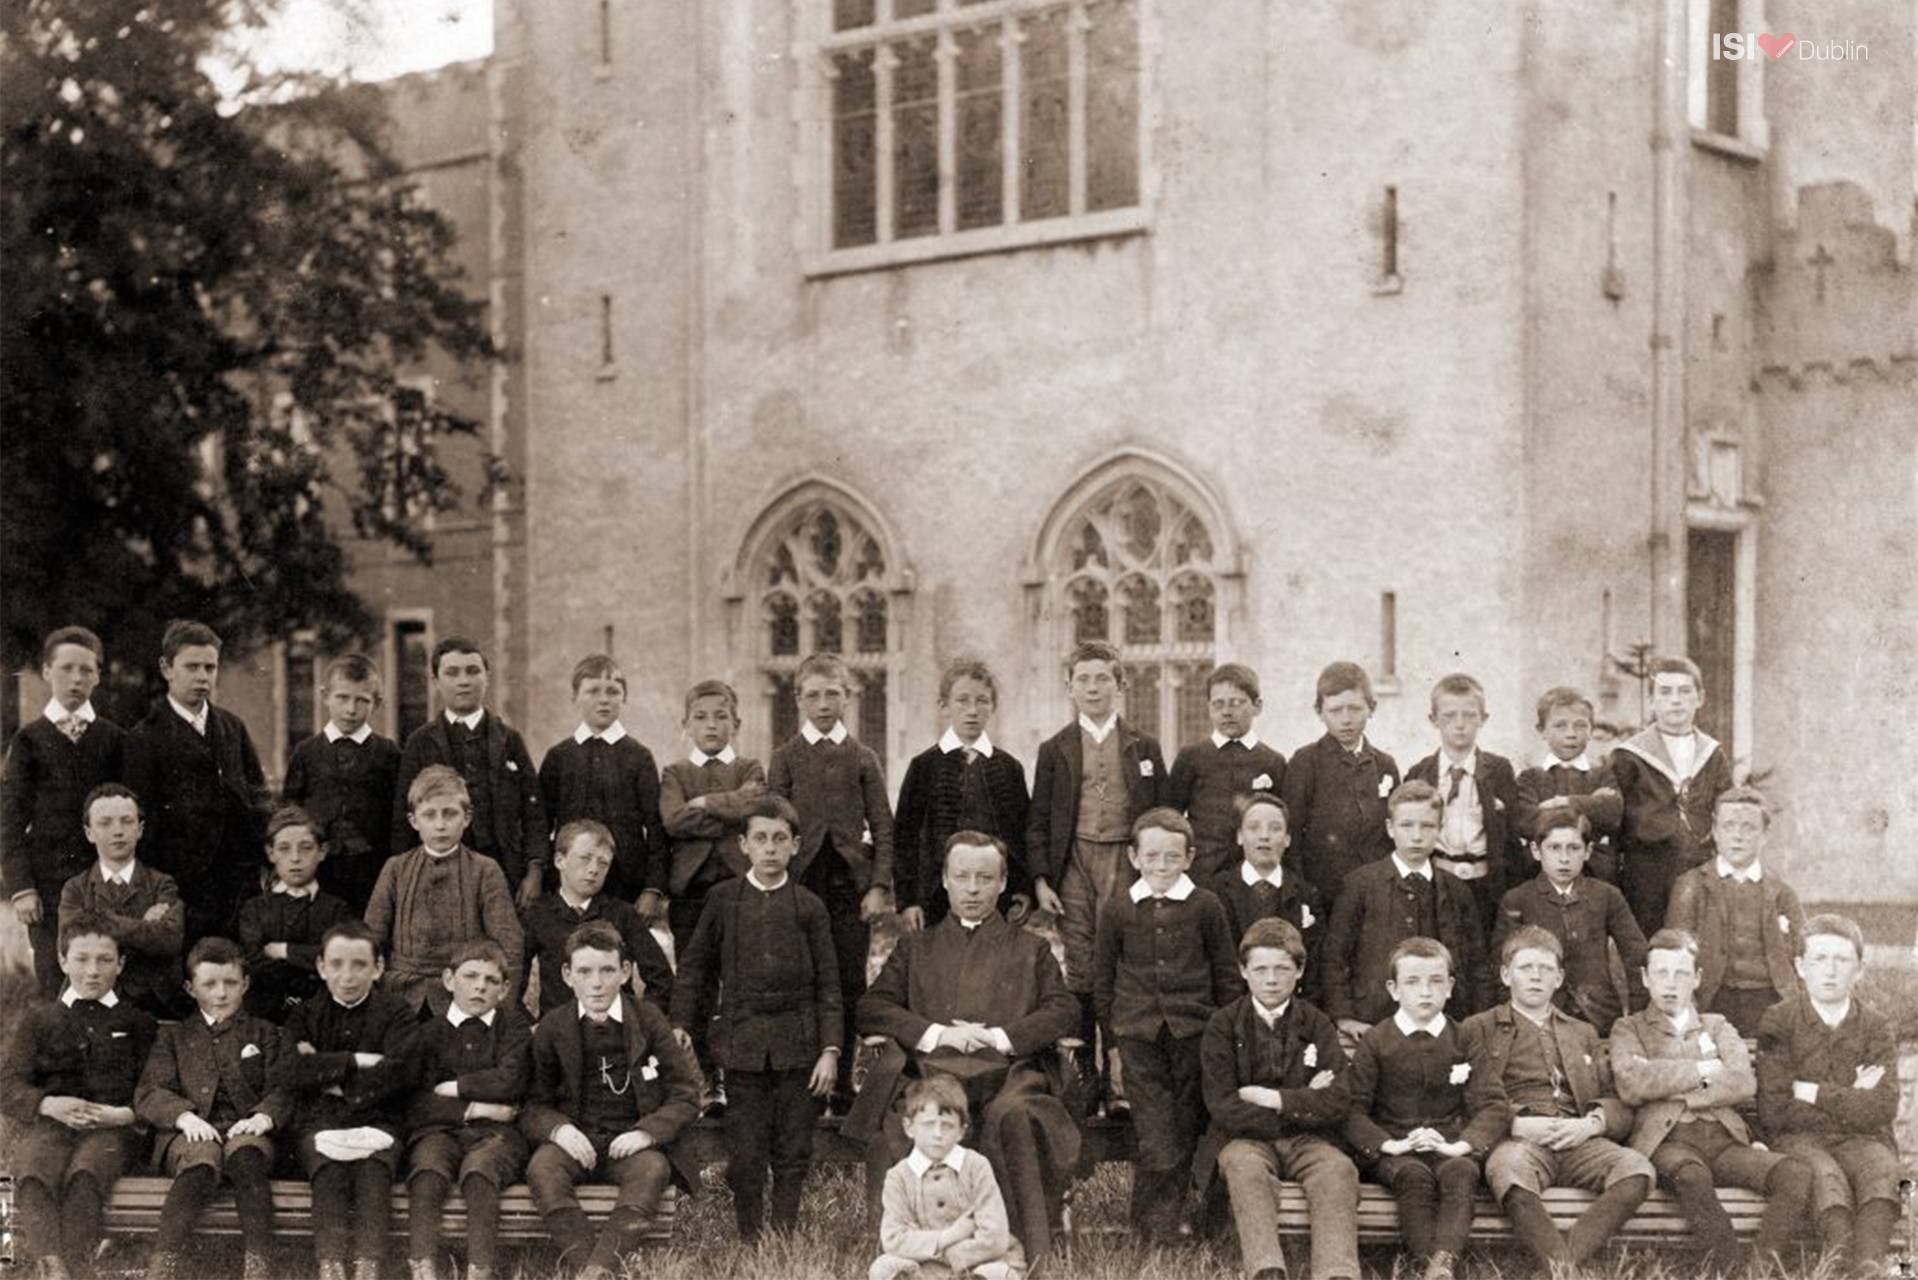 James Joyce, seated front and centre at Clongowes Wood College, S.J., Salins, Co. Kildare, 1888, where he was educated prior to entering Belvedere College, S.J., Great Denmark Street, Dublin 1. The man behind Joyce is one Father Power, S.J., who appears in A Portrait of the Artist as a Young Man (1916) as Father Arnall. Also in this picture are three of the boys mentioned by name in the Clongowes chapter of A Portrait: Rody Kickham (“a decent fellow”), Nasty Roche (who “was a stink”), and the bully Charles Wells.